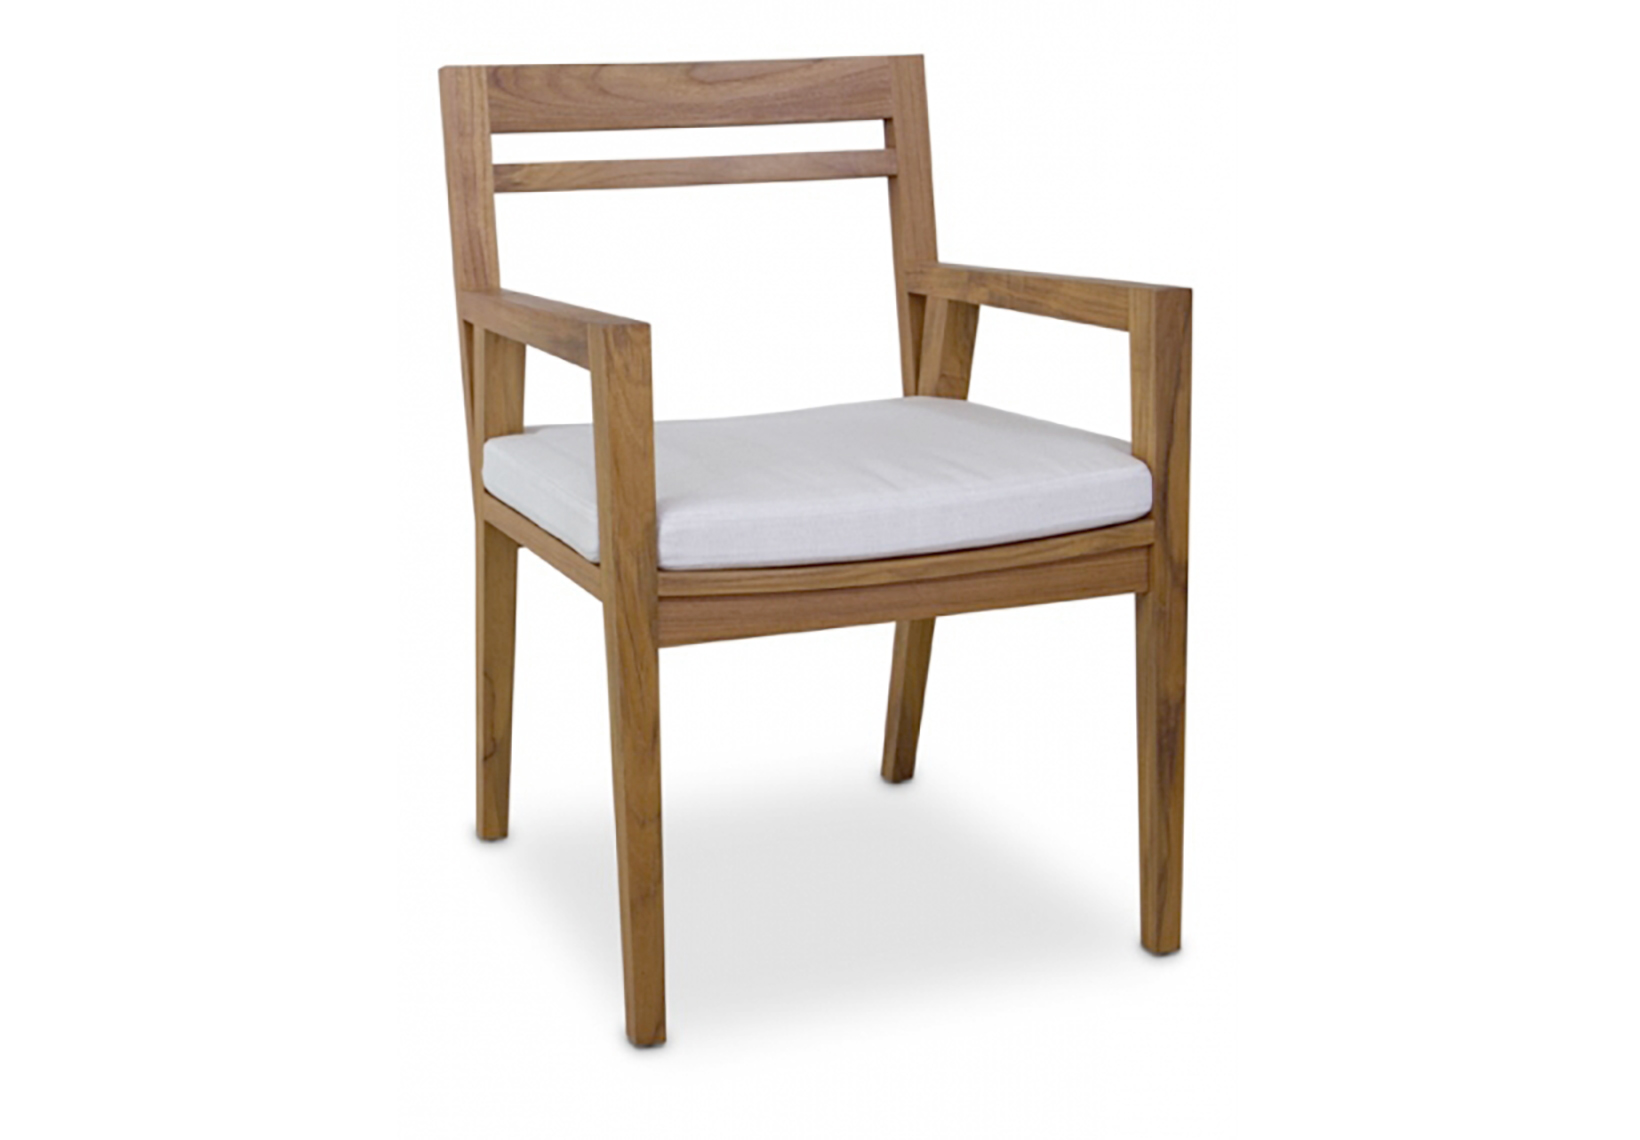 Spavision | Neo Angulo Arm Chair Upholstered